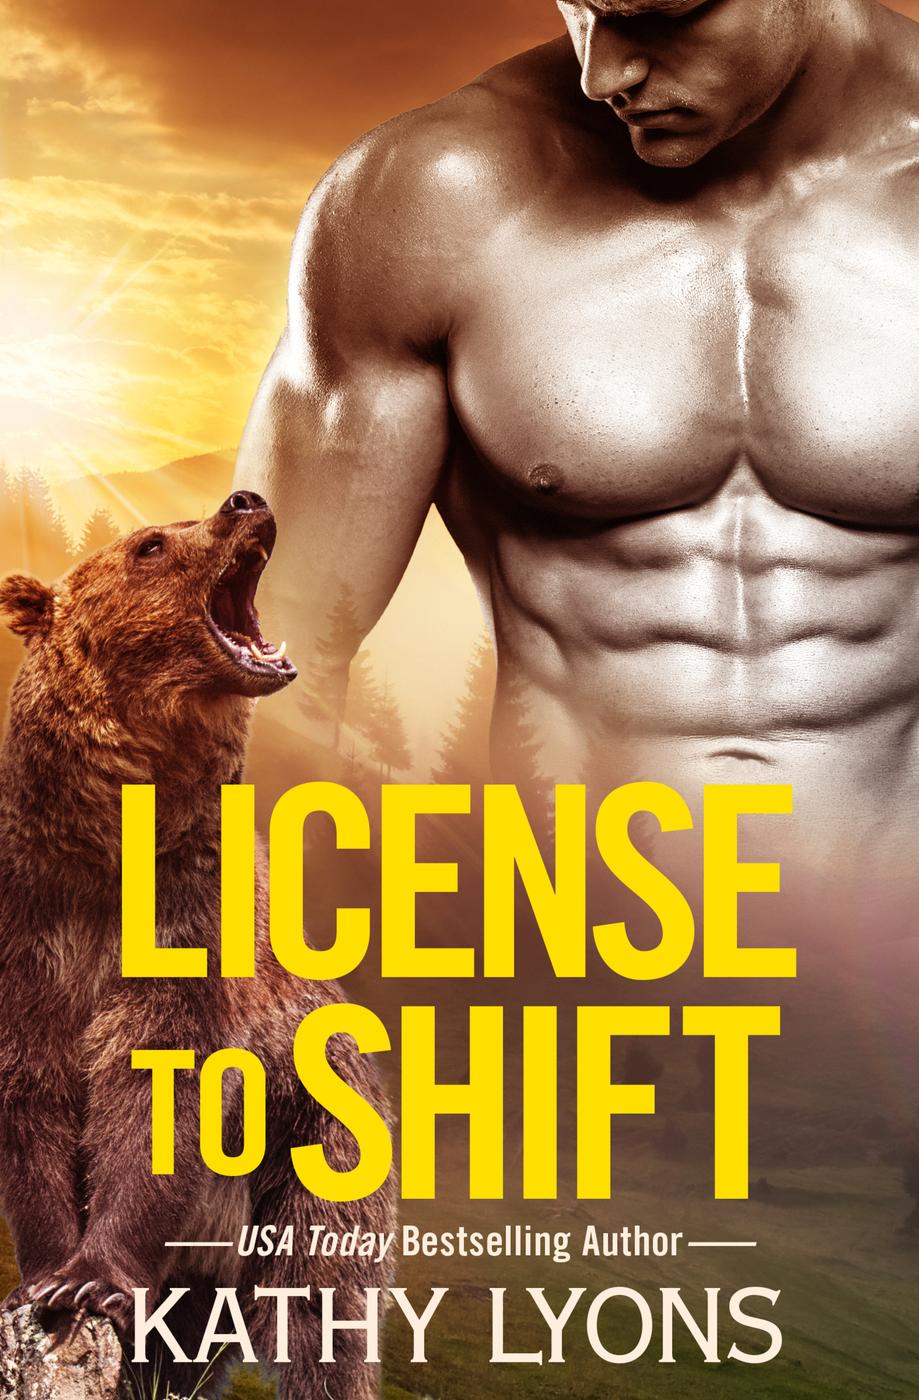 License to Shift (2016) by Kathy Lyons